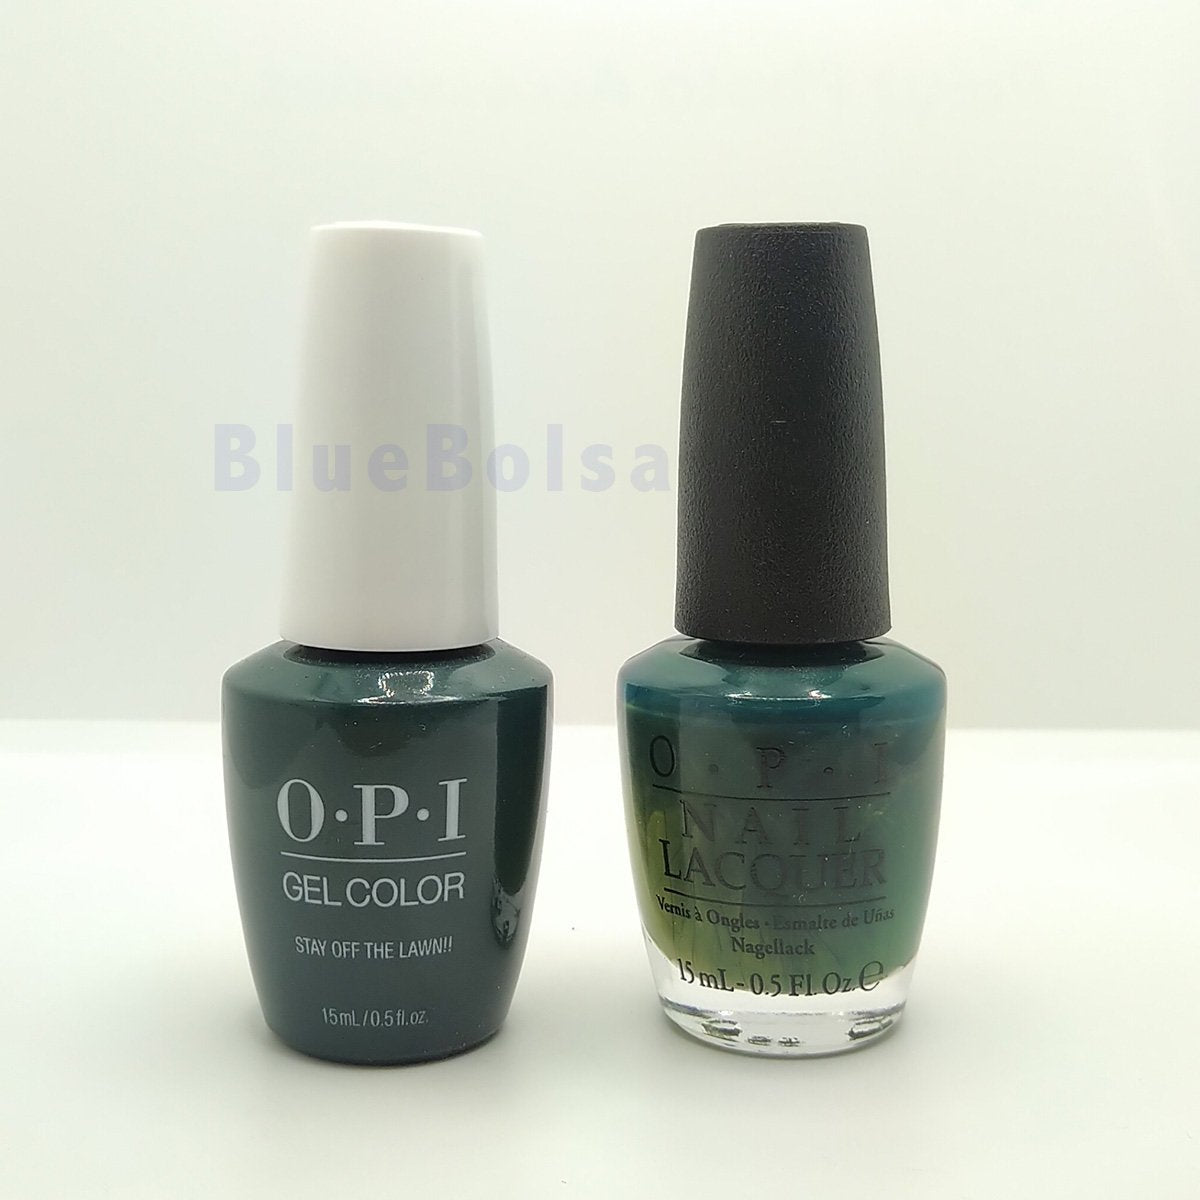 OPI Gel Color Stay Strong Duo